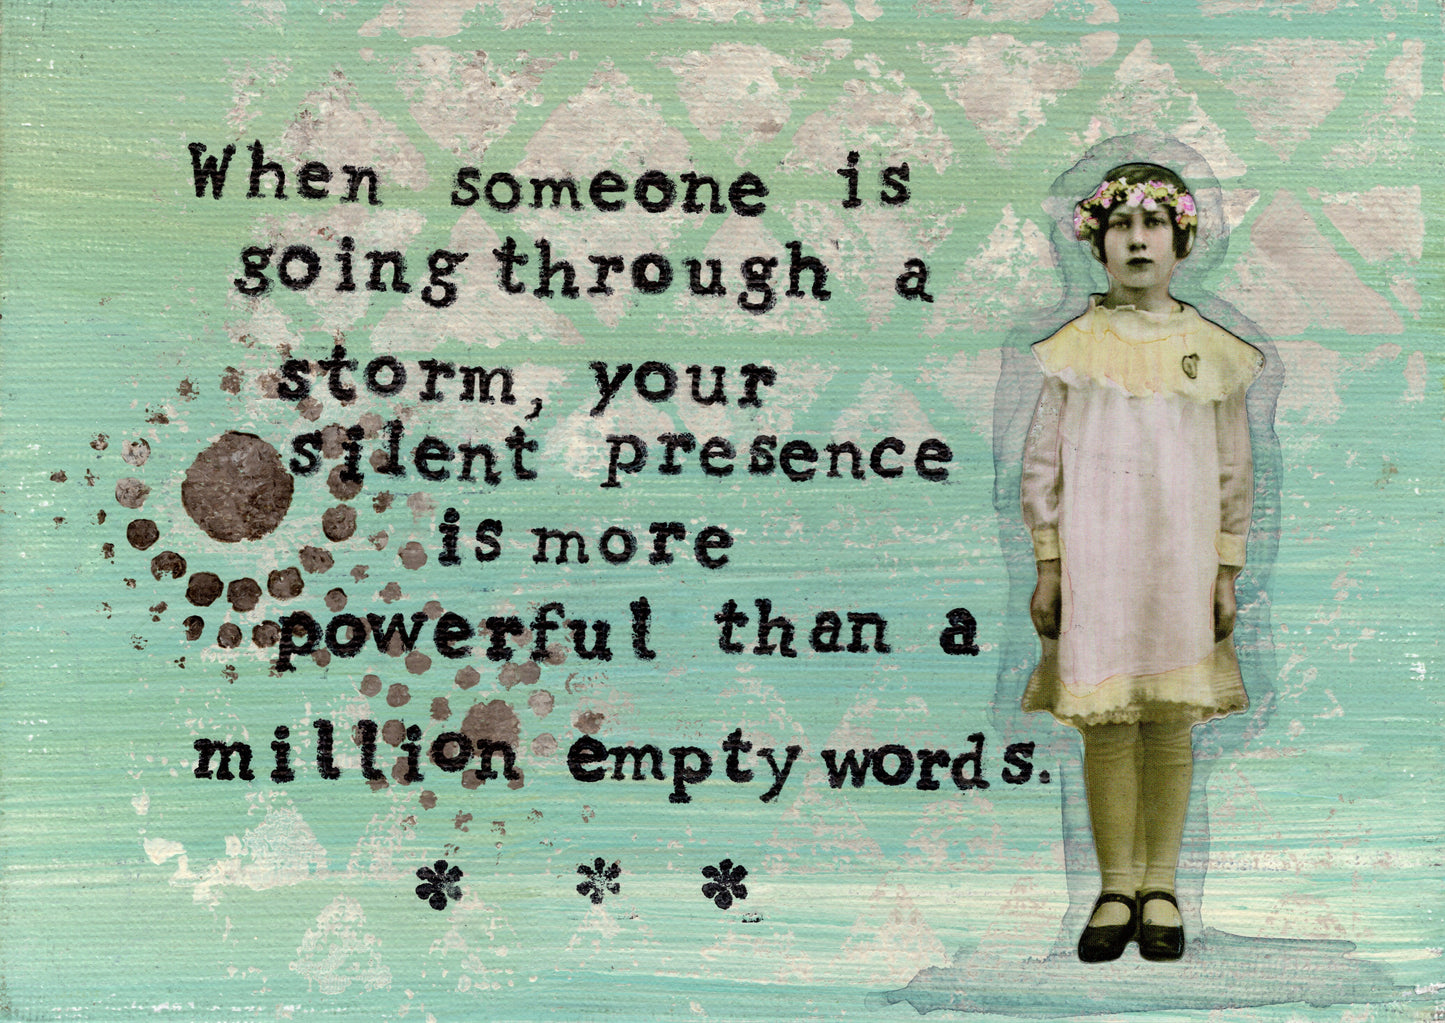 When someone is going through a storm your presence is more powerful than a million empty words.